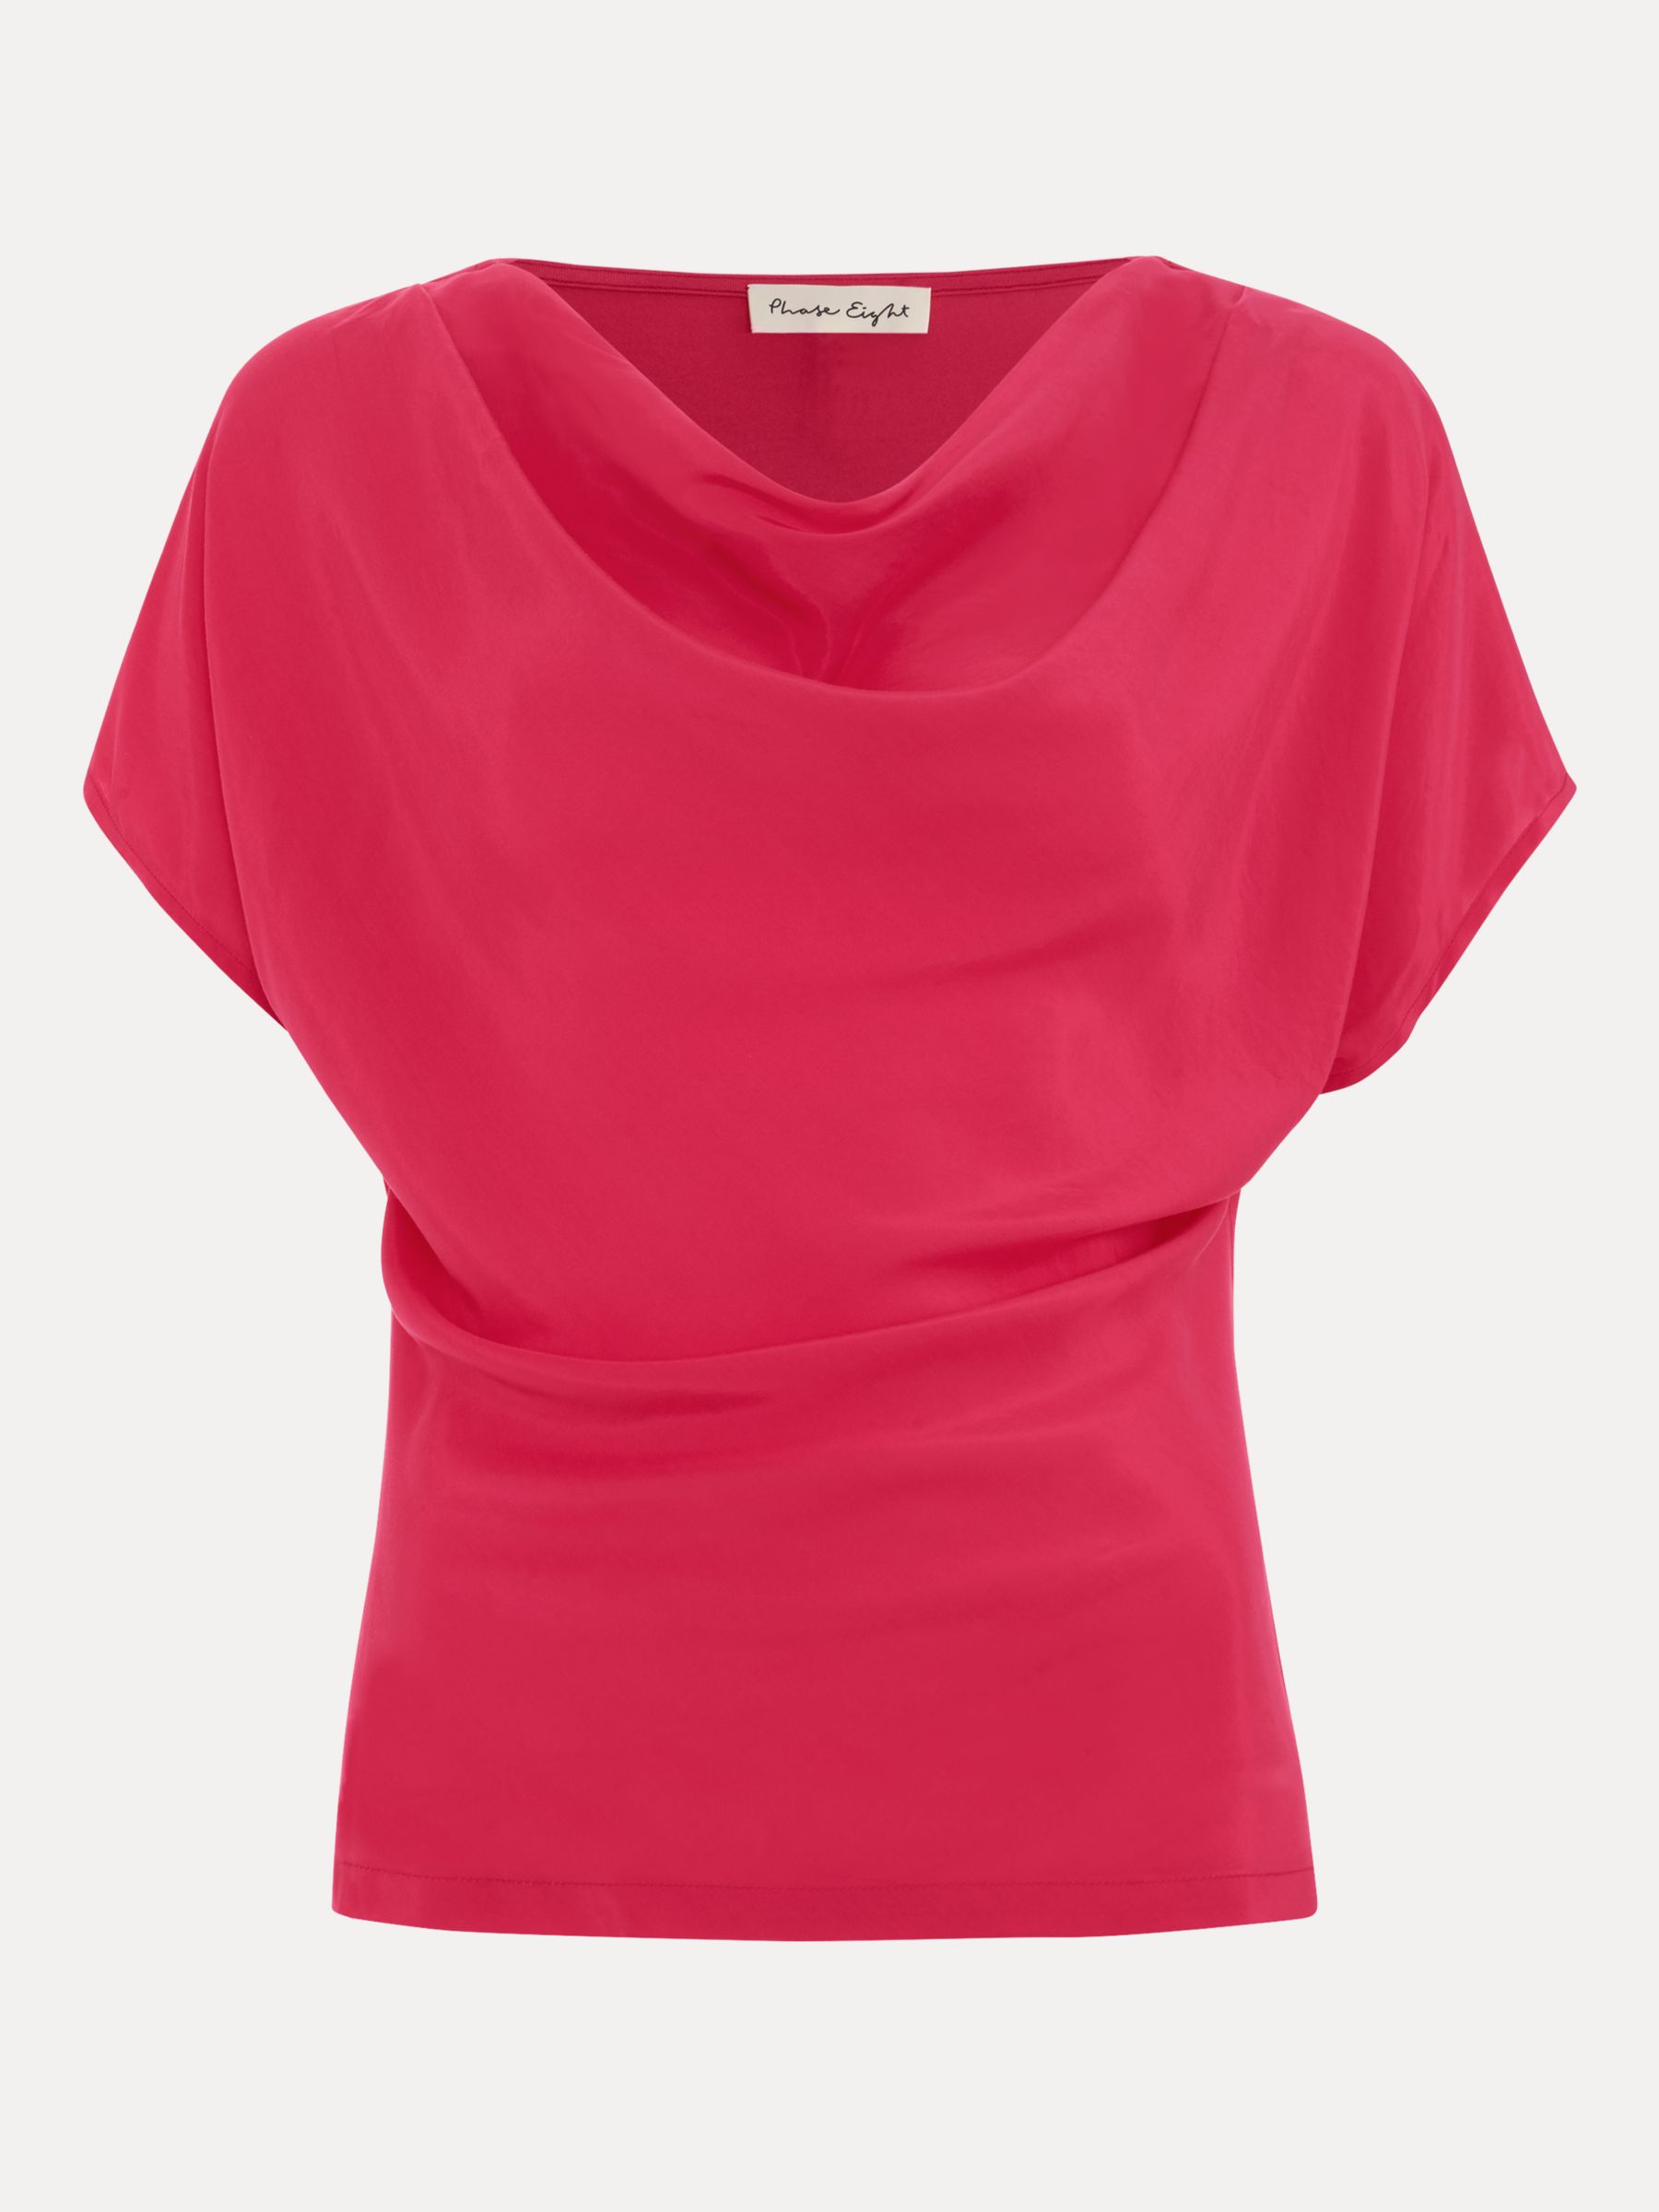 Phase Eight Cheryl Cowl Neck Top, Pink, 8